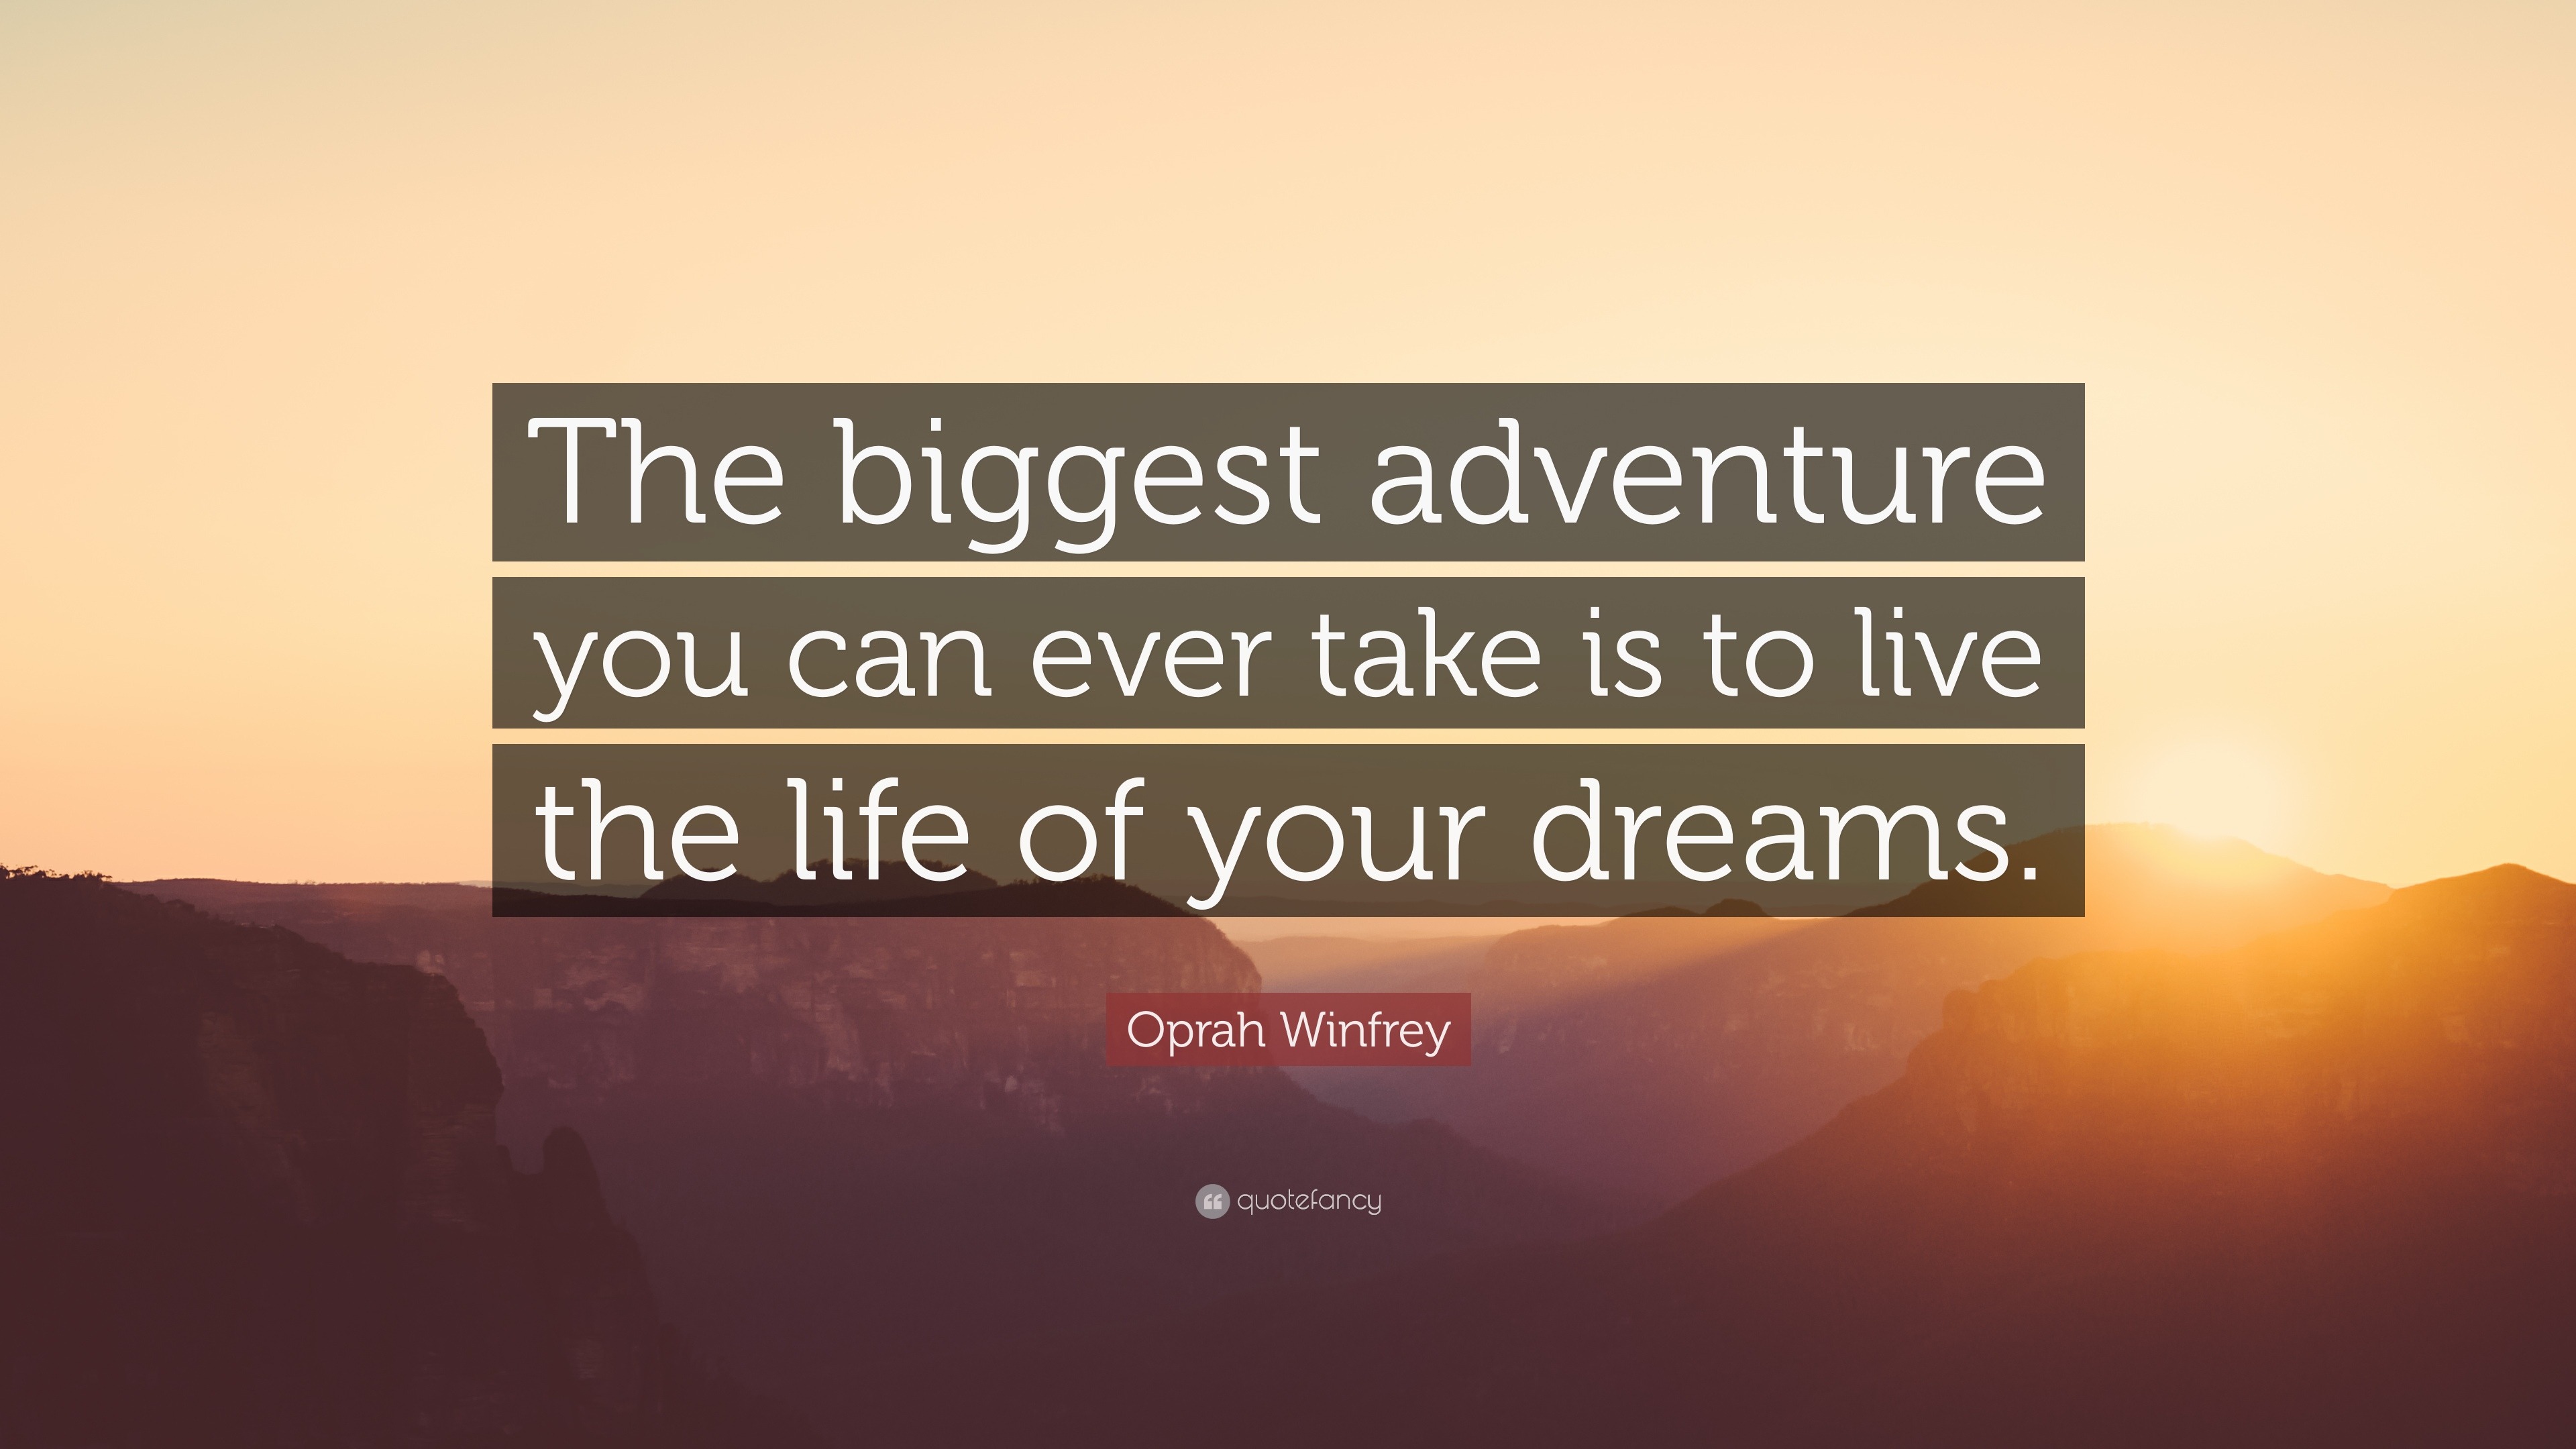 Oprah Winfrey Quote “The biggest adventure you can ever take is to live the